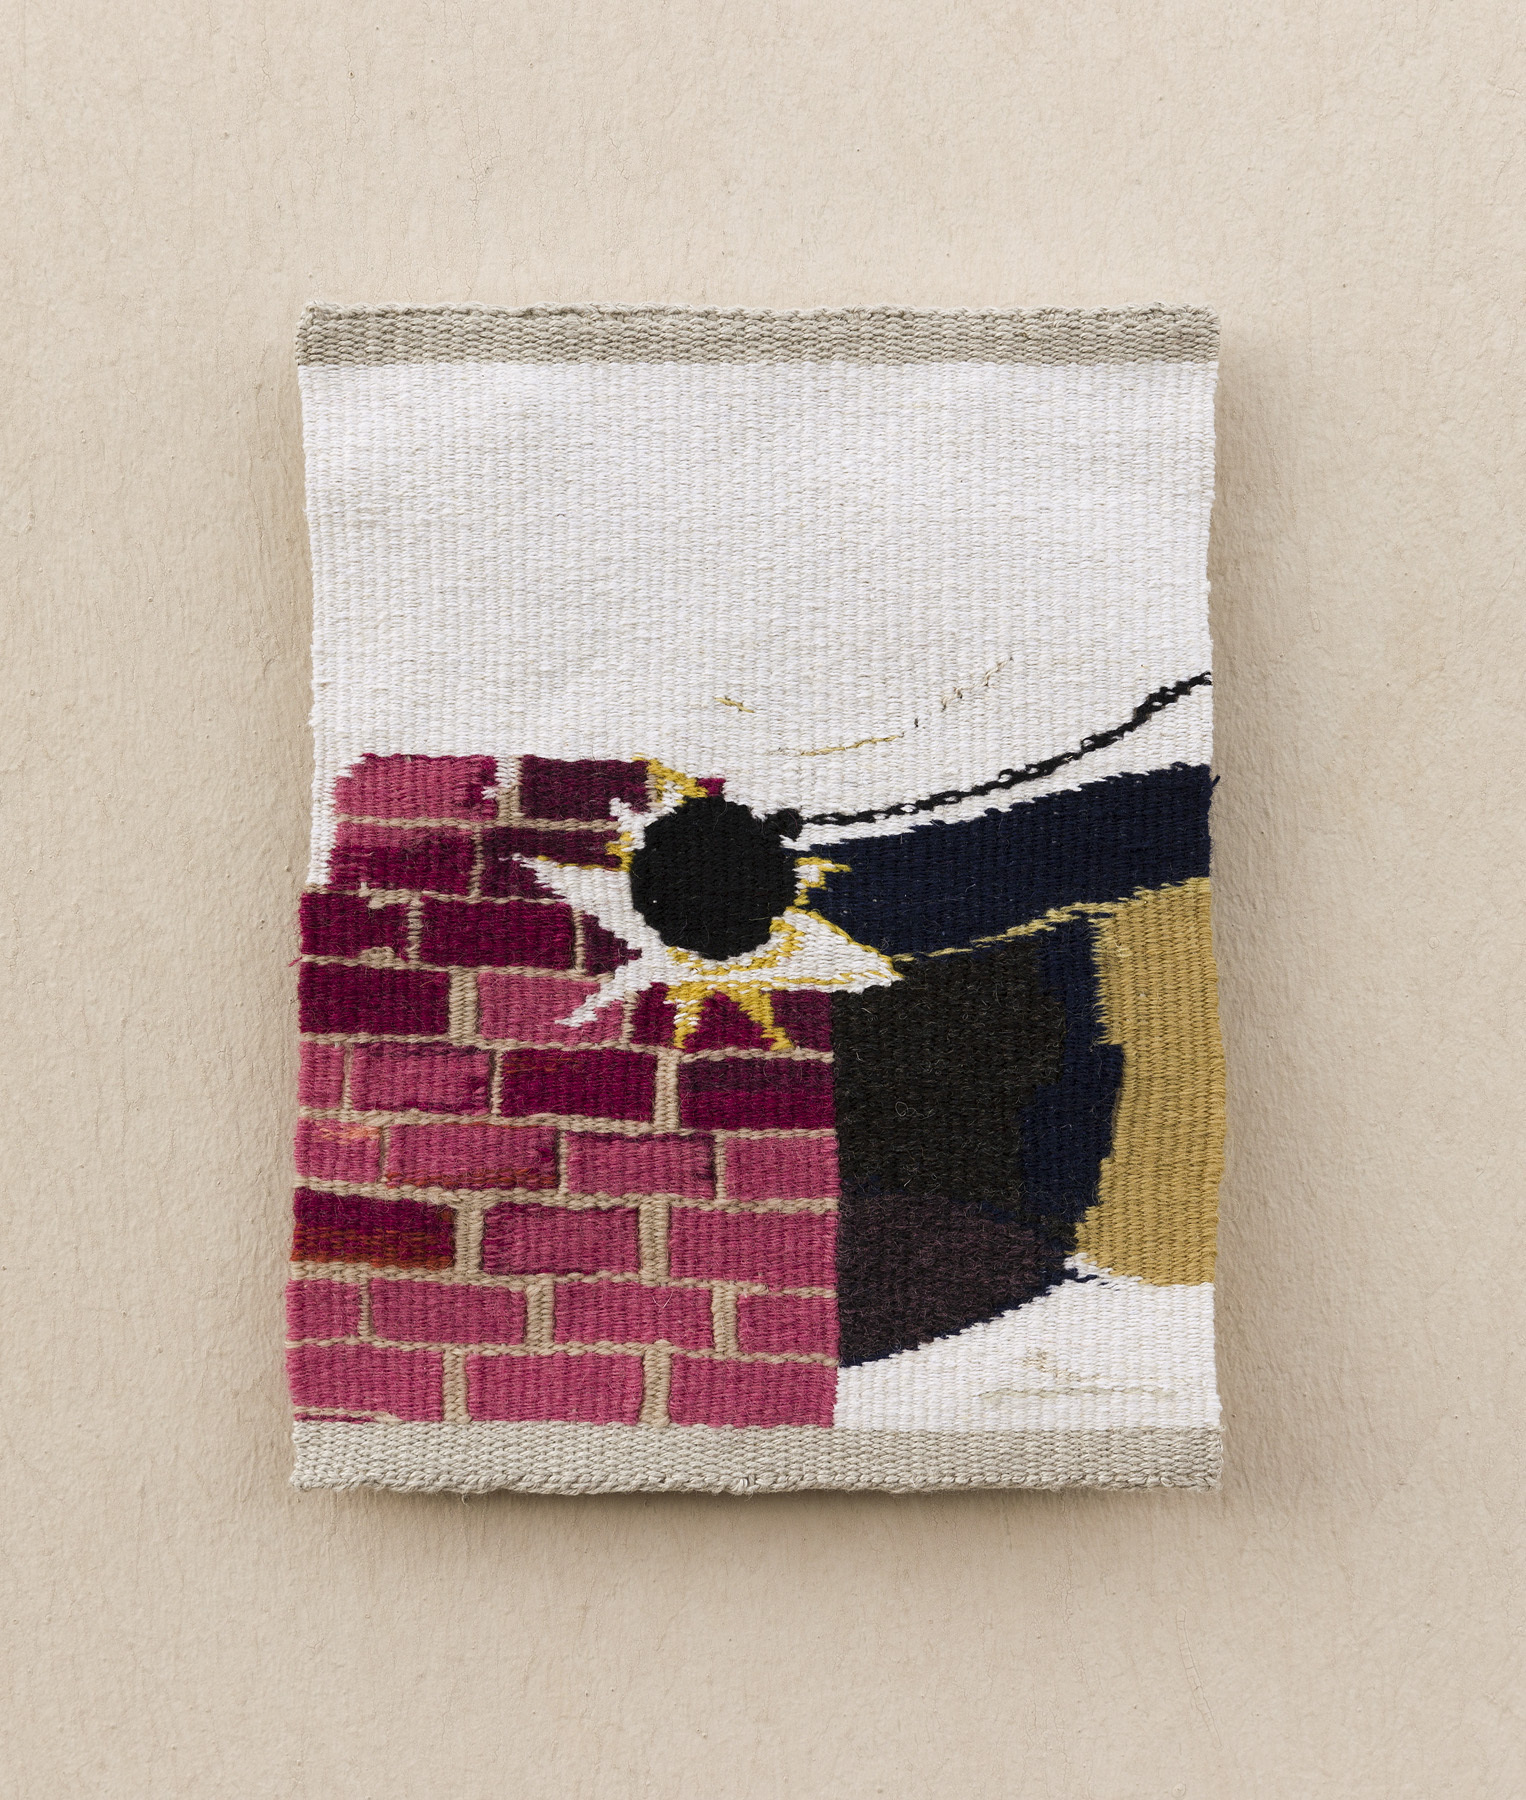 Pia Ferm, 50/50, 2020, Woven Tapestry, 31x25 cm